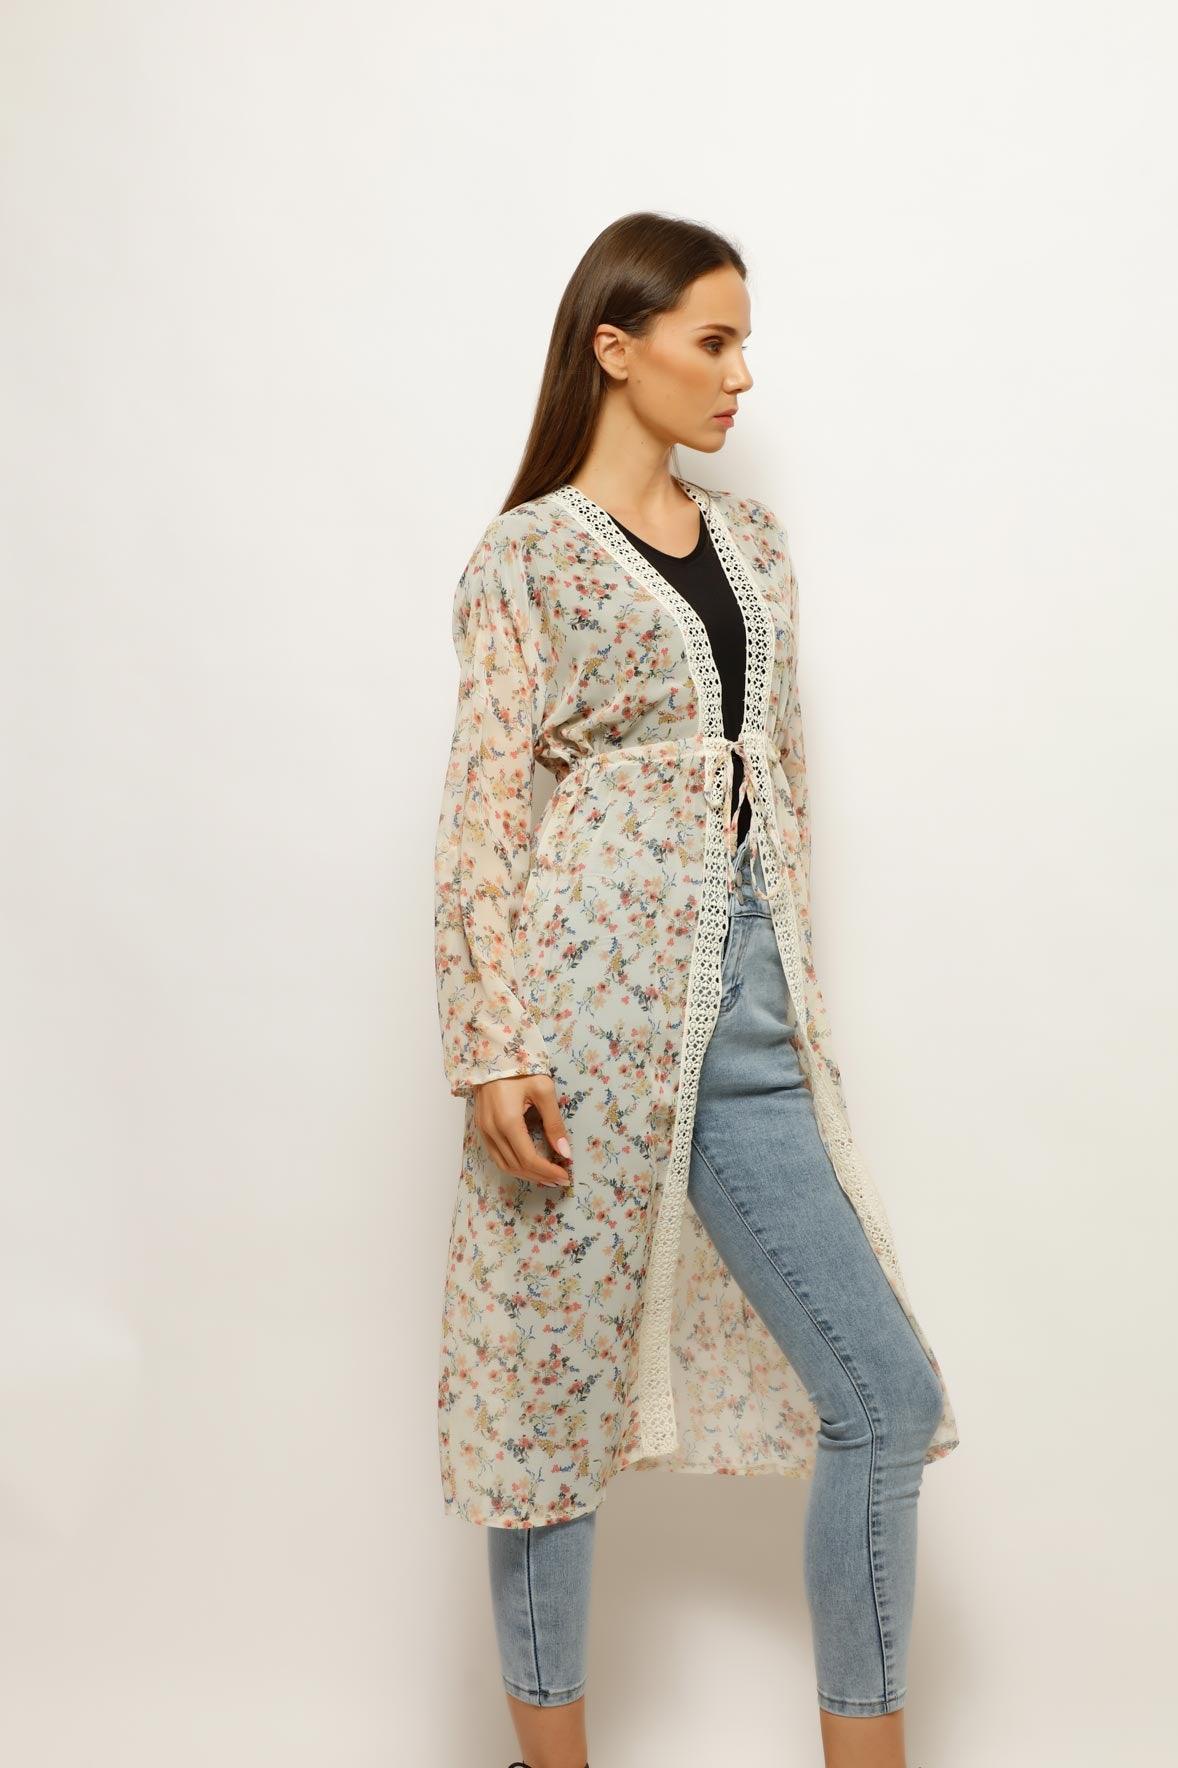 HIRKA FLOWY FLORAL CARDIGAN, CARDIGAN, CORADO, cardigan, corado fashion, coradomoda, FASHION, floral, flowy, lace, lifestyle, off white, printed, see through, street style, style, summer, tie, top, vibe, women, coradomoda, coradomoda.com